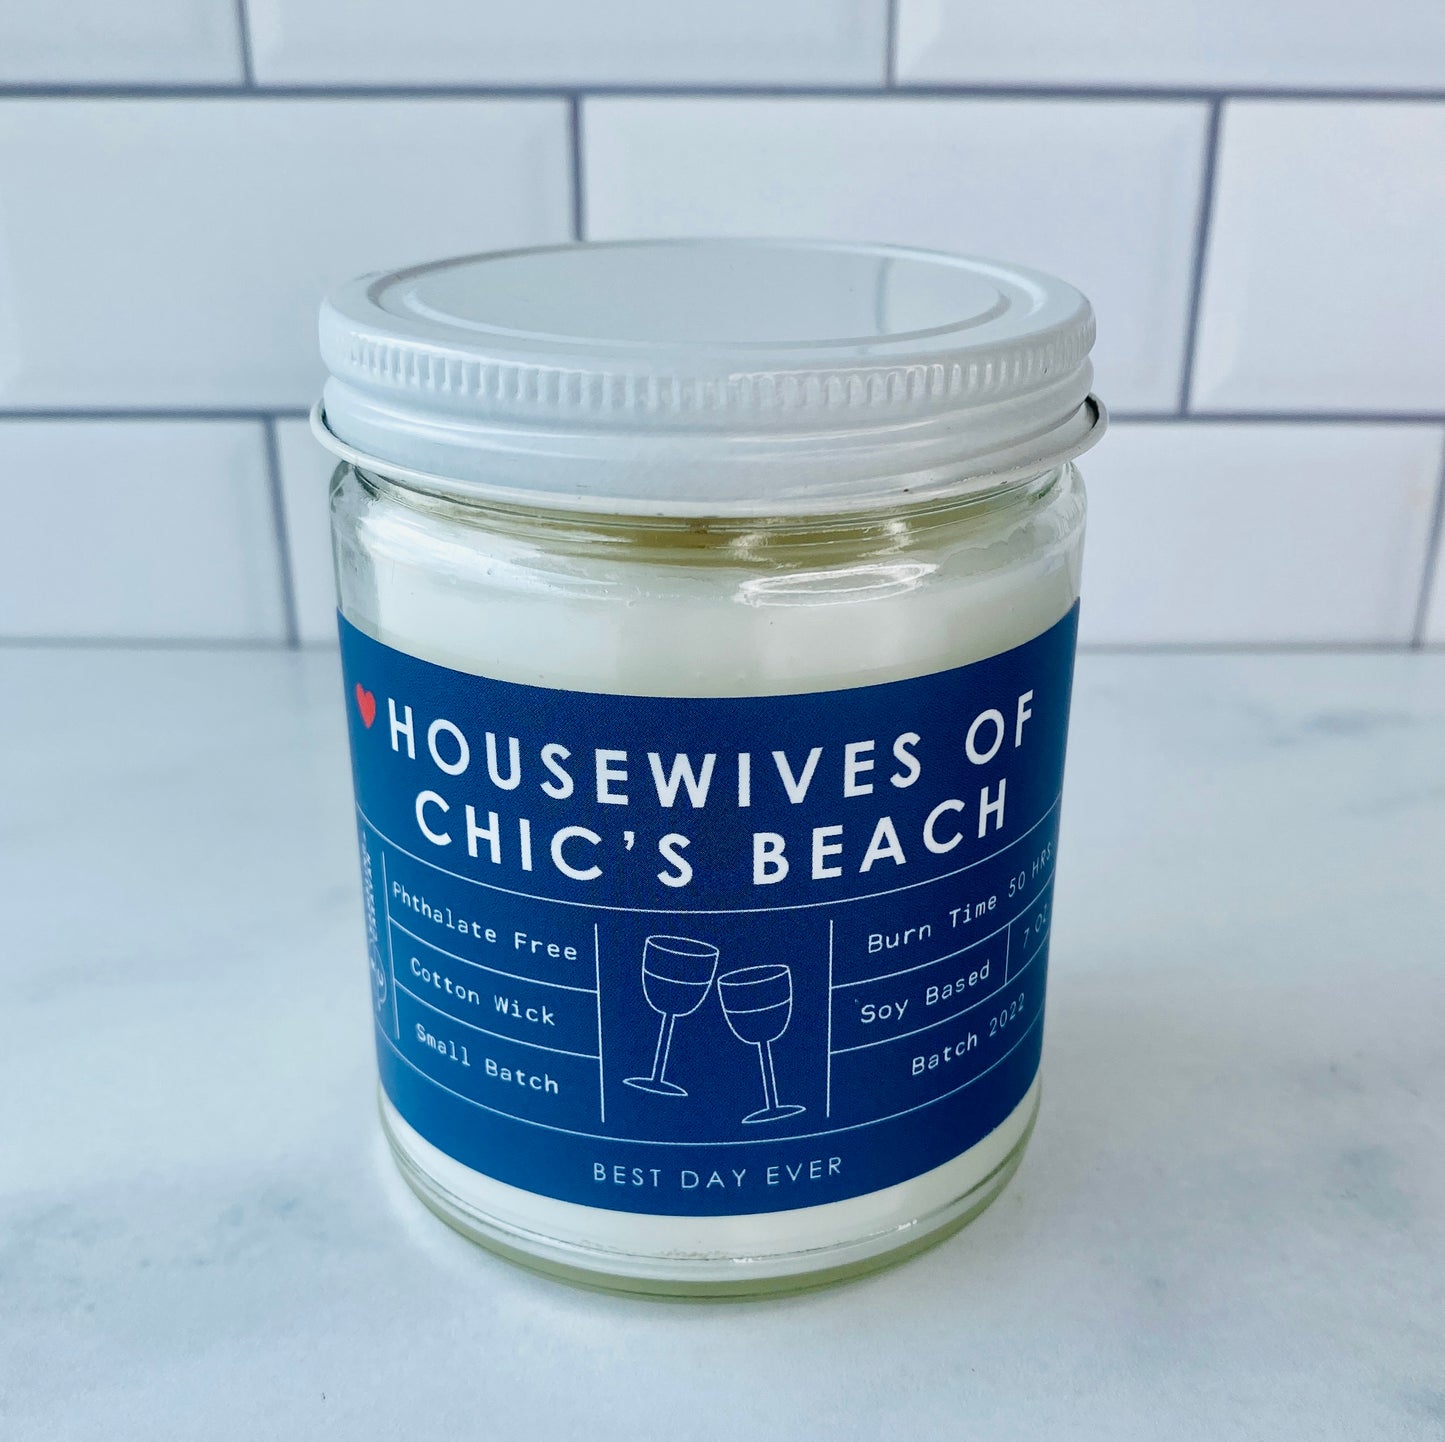 Housewives of Chic's Beach Candle